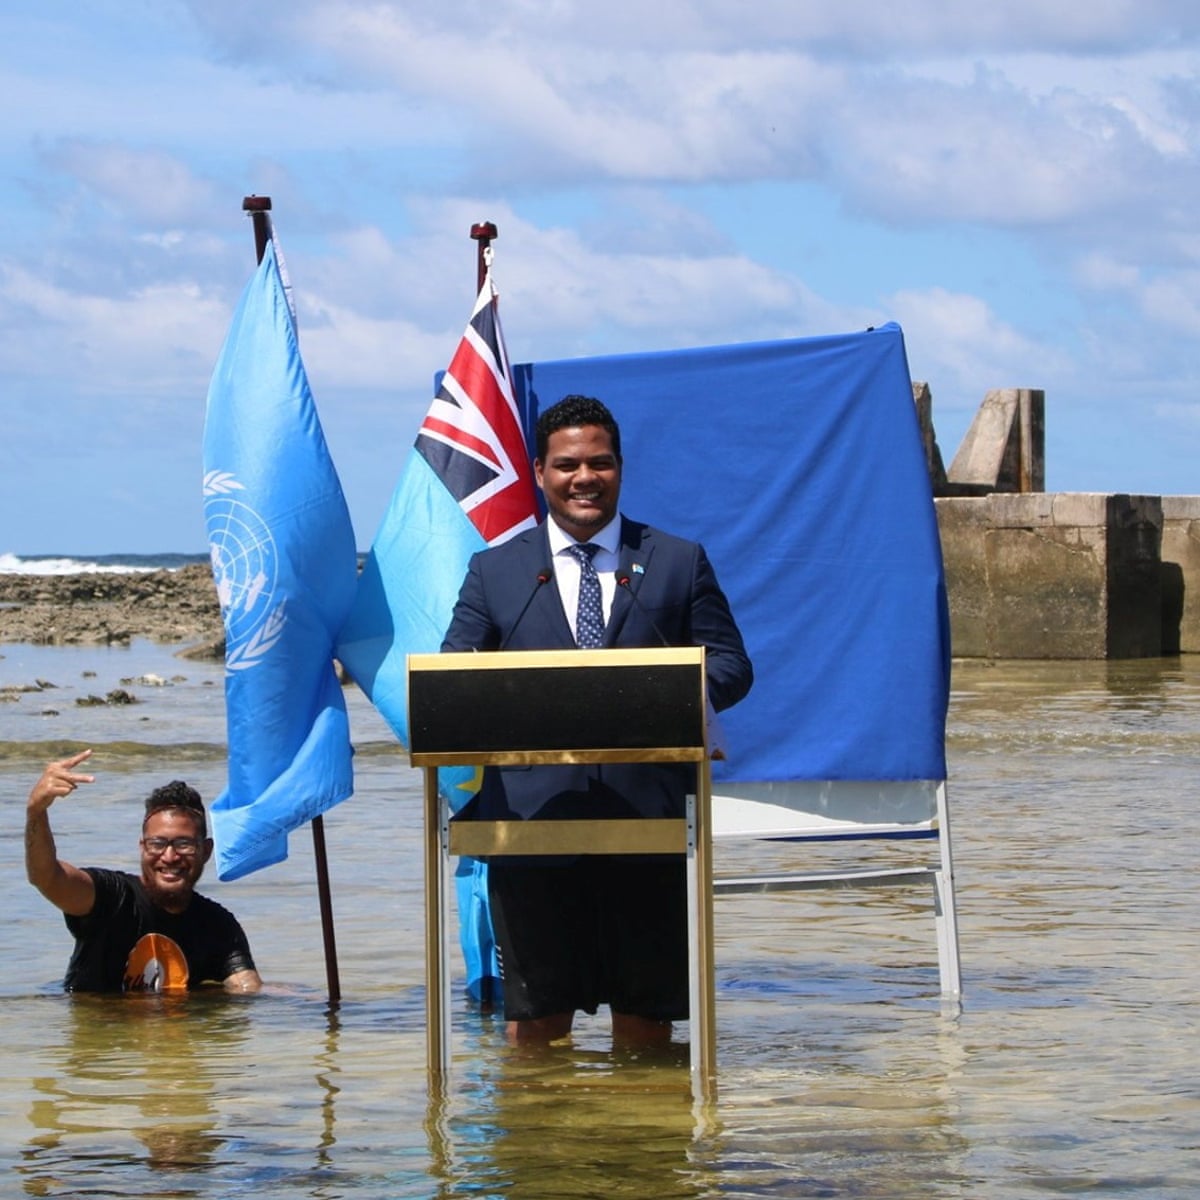 Delegate from Tuvalu standing in water to highlight the impacts of loss and damage